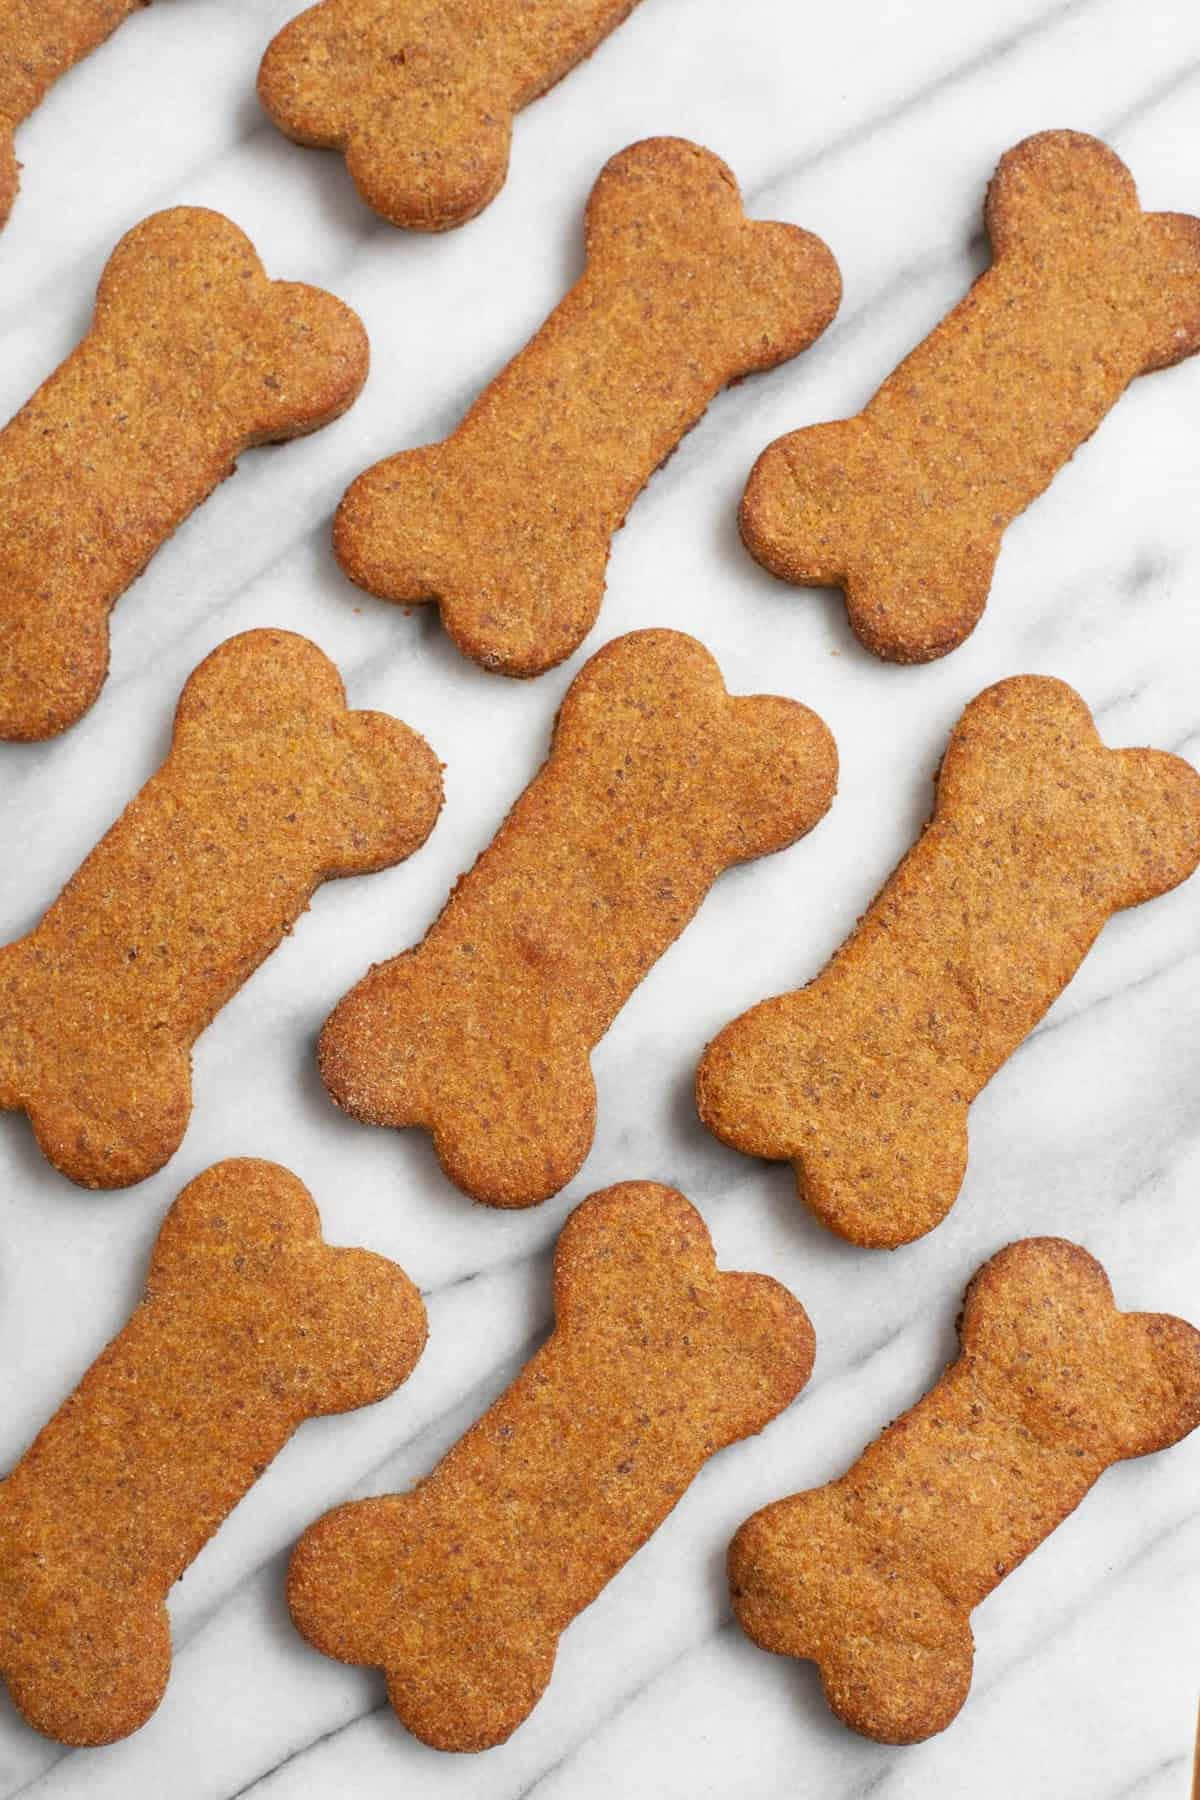 Close-up view of delicious and nutritious dog treats.